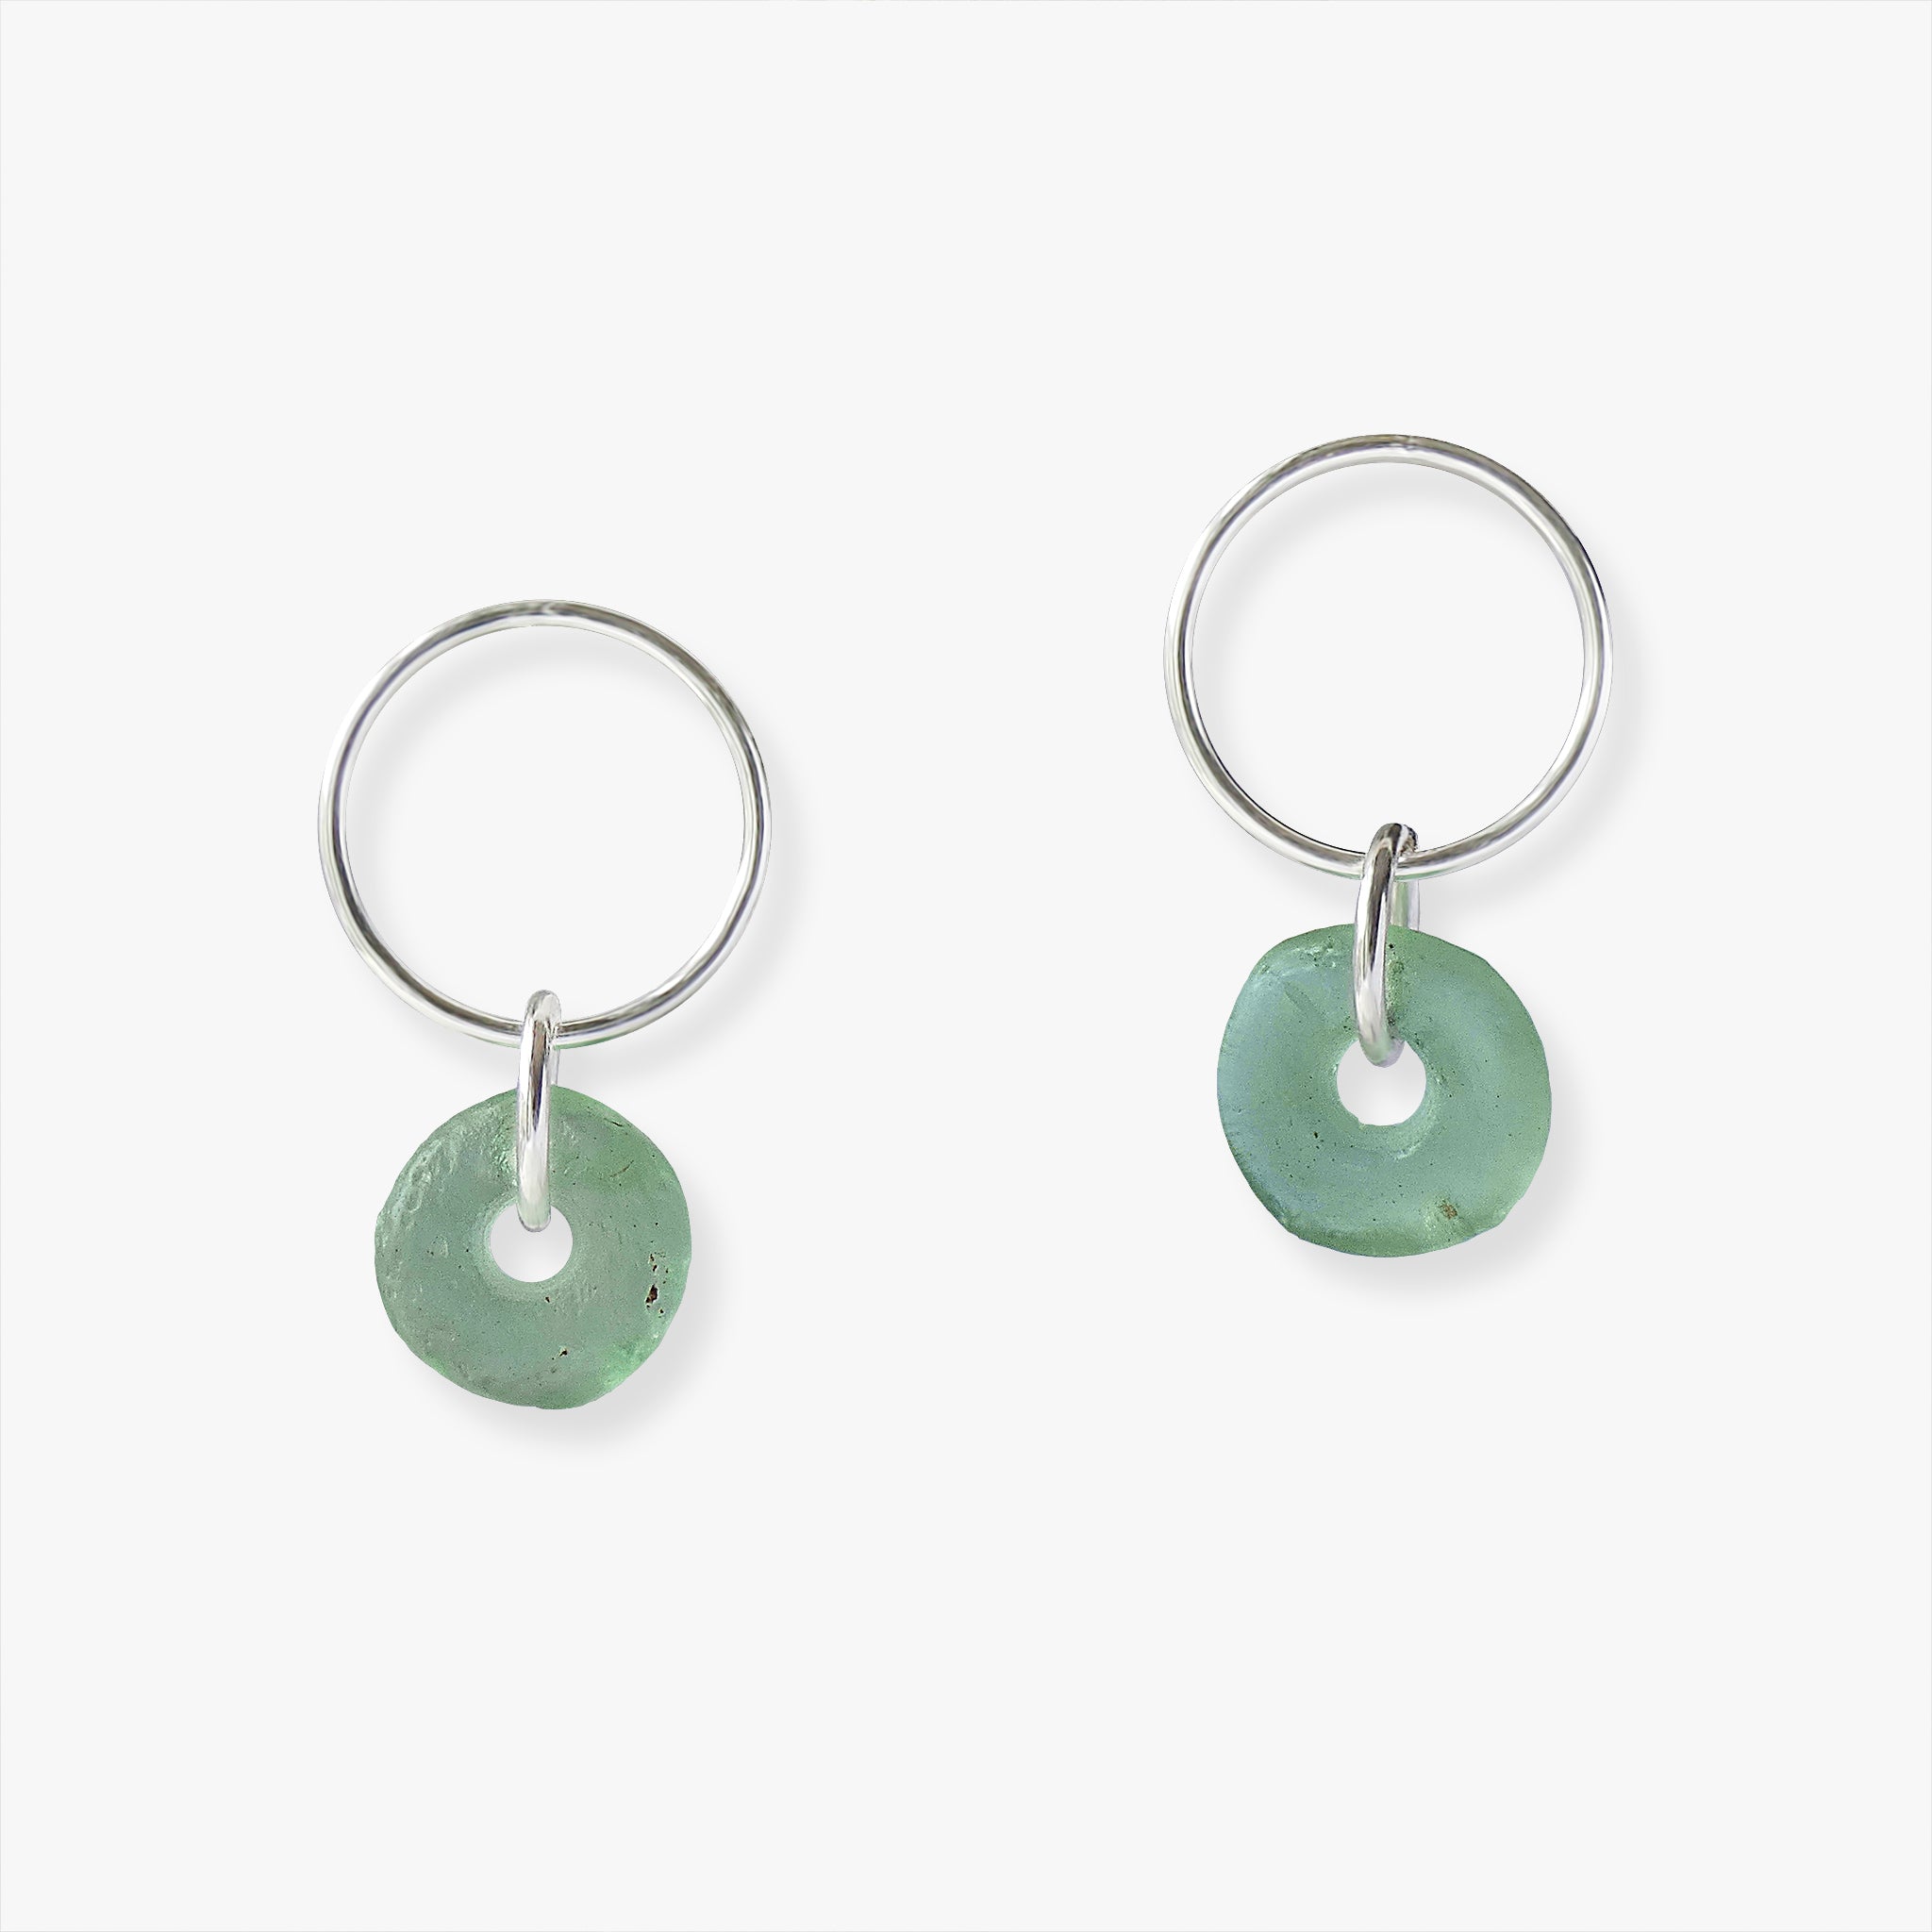 mmi3nsa sterling silver circle stud earrings, with aqua coloured doughnut shaped beads. The beads are handmade in Ghana from recycled glass.